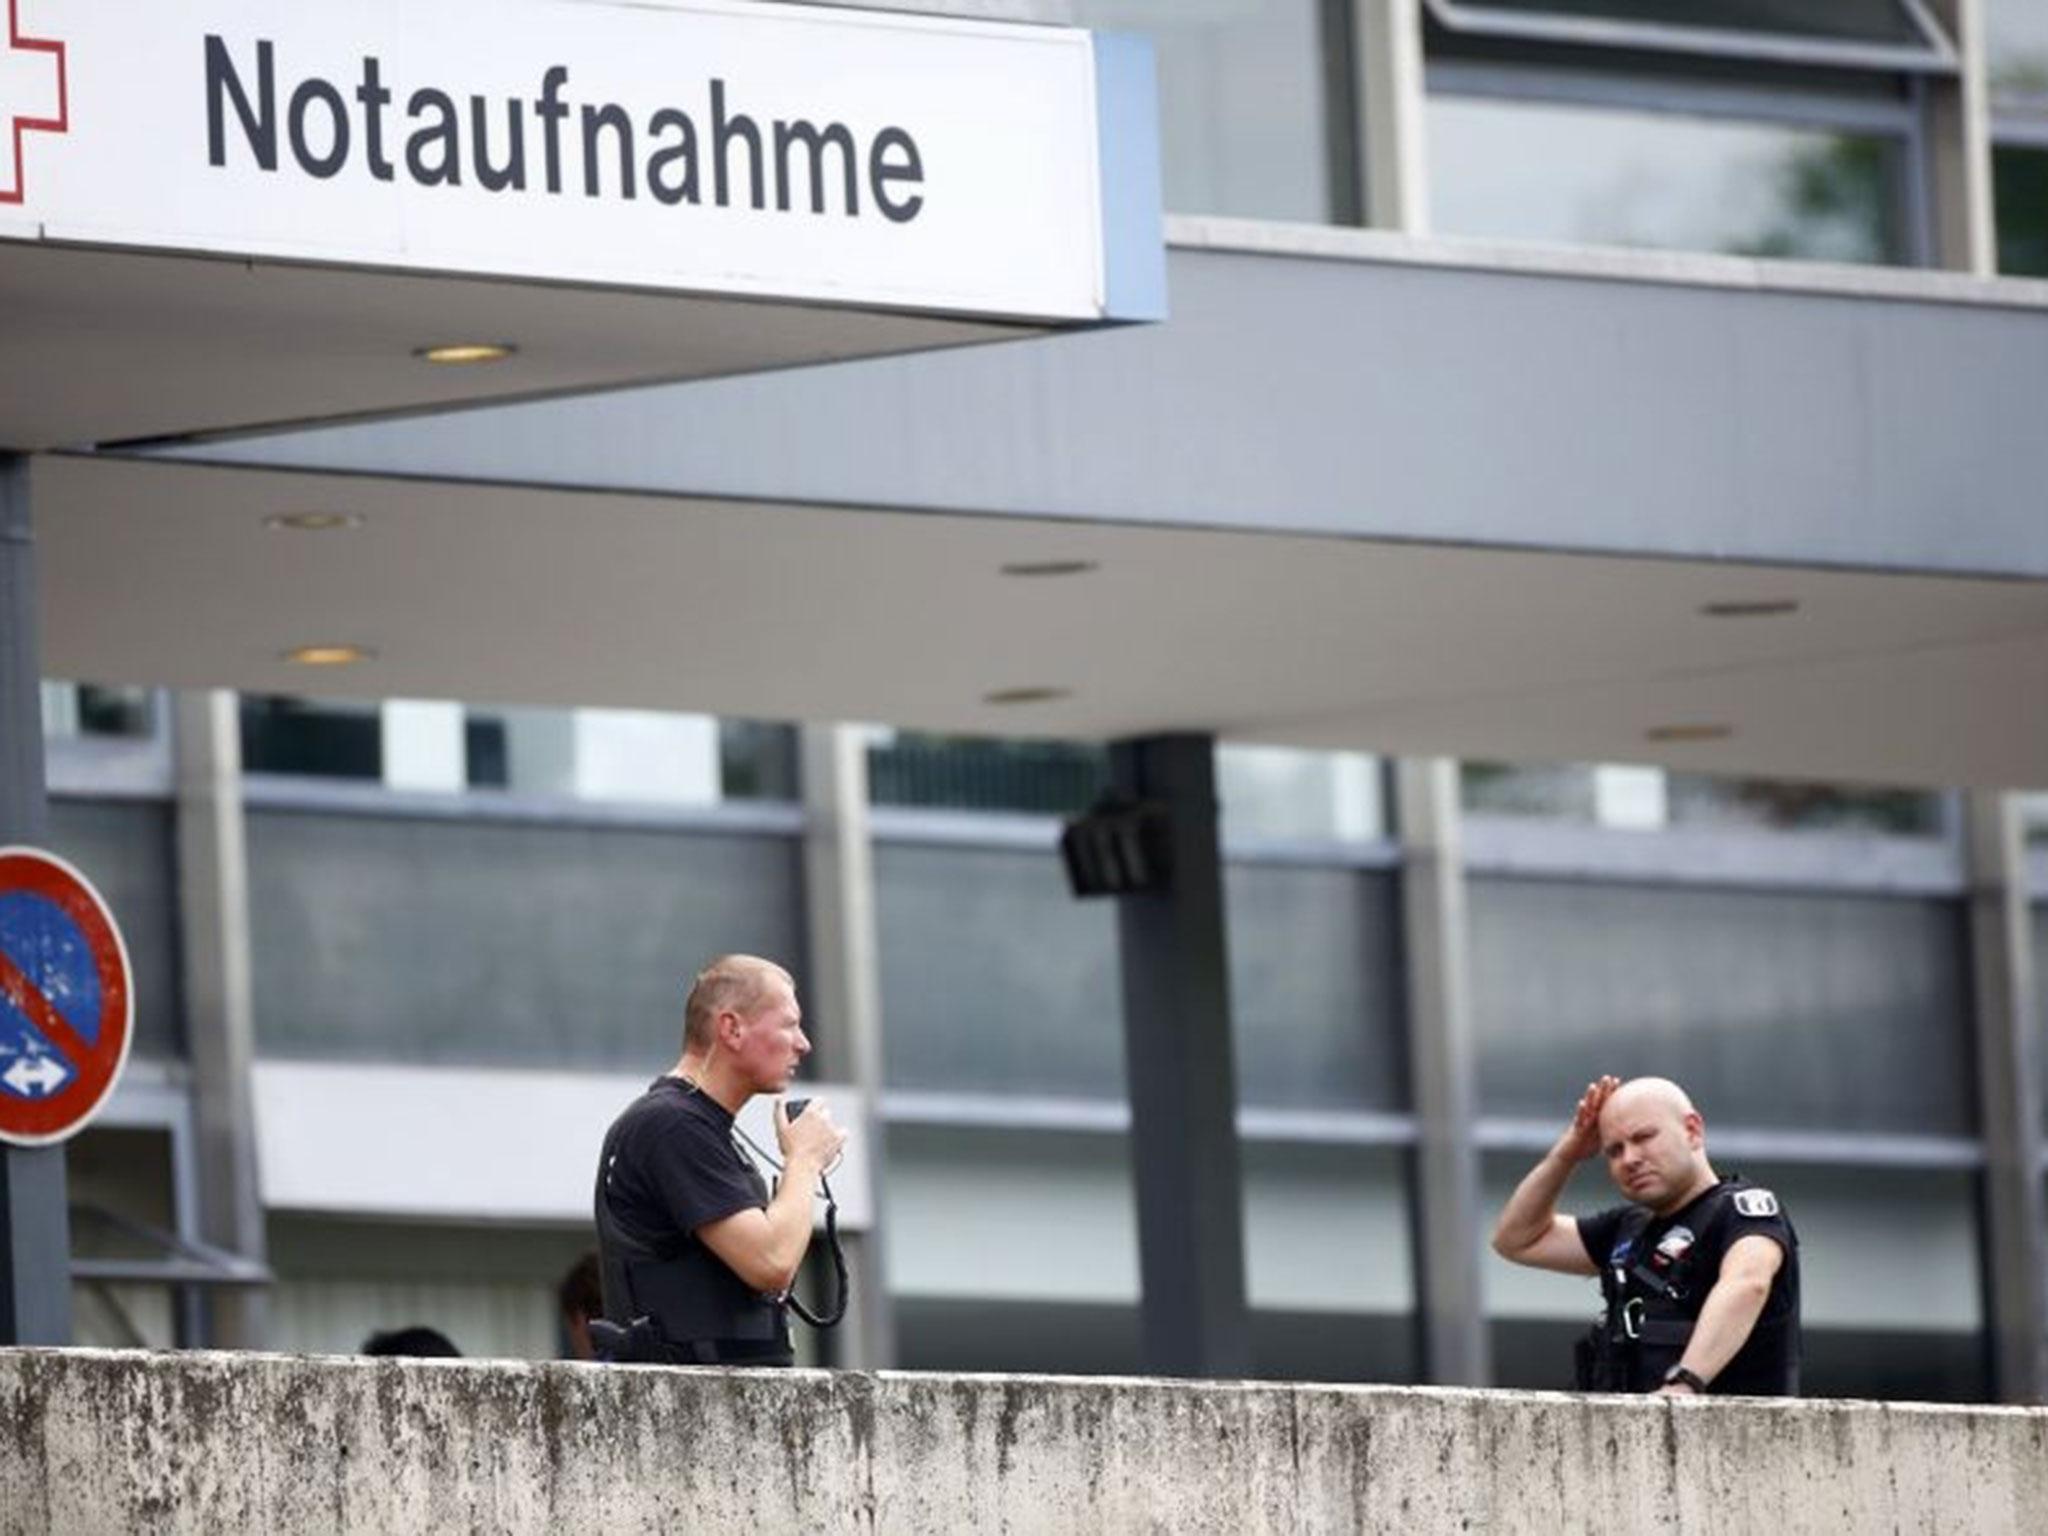 Police stand outside the university clinic in Steglitz, a southwestern district of Berlin, 26 July, 2016, after a doctor had been shot at and the gunman had killed himself